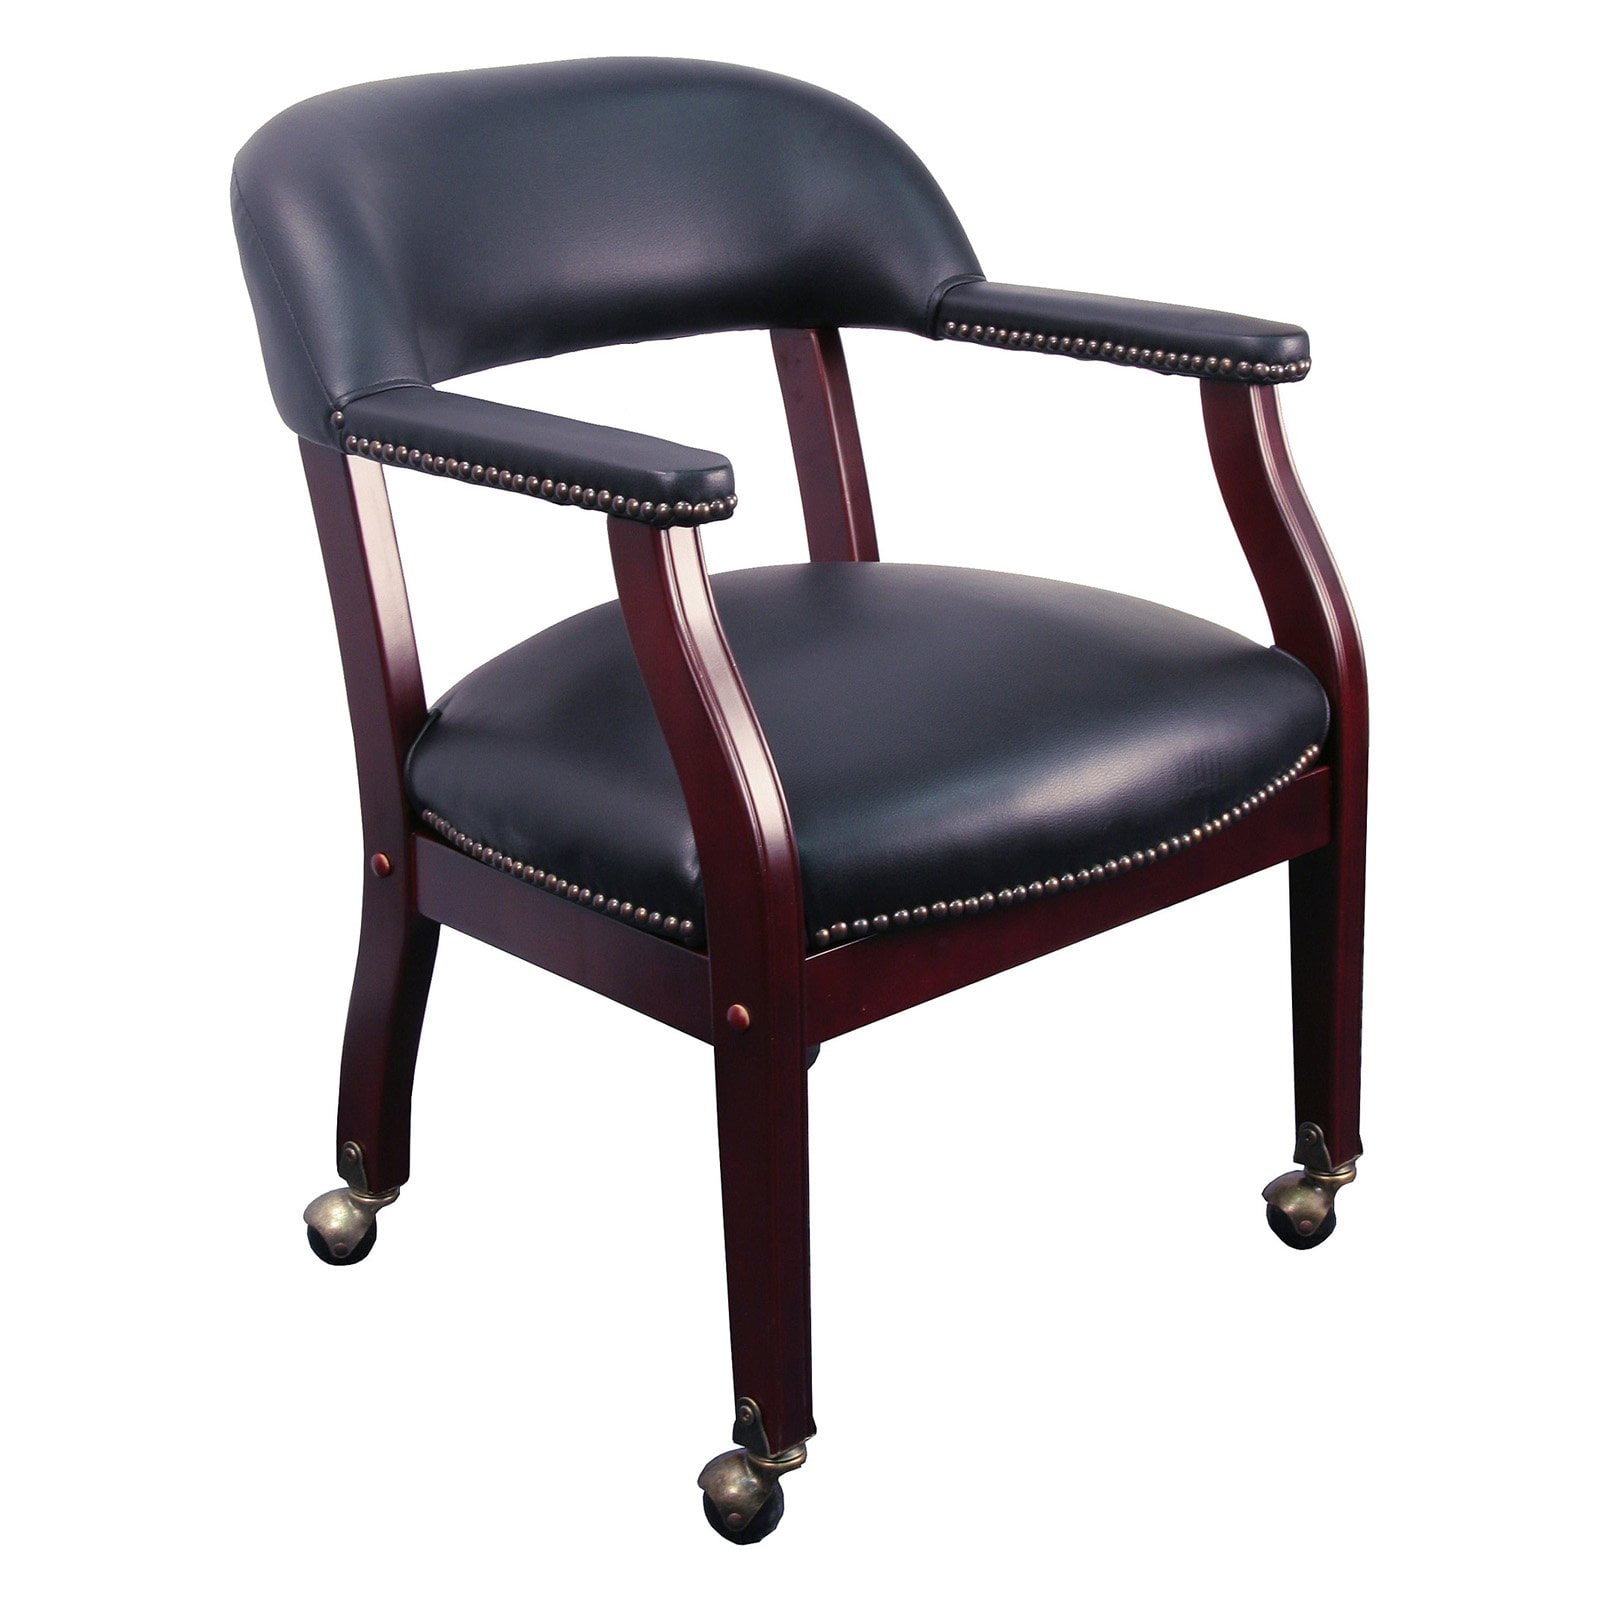 Traditional Captains Chair In Black Vinyl Leather Luxurious